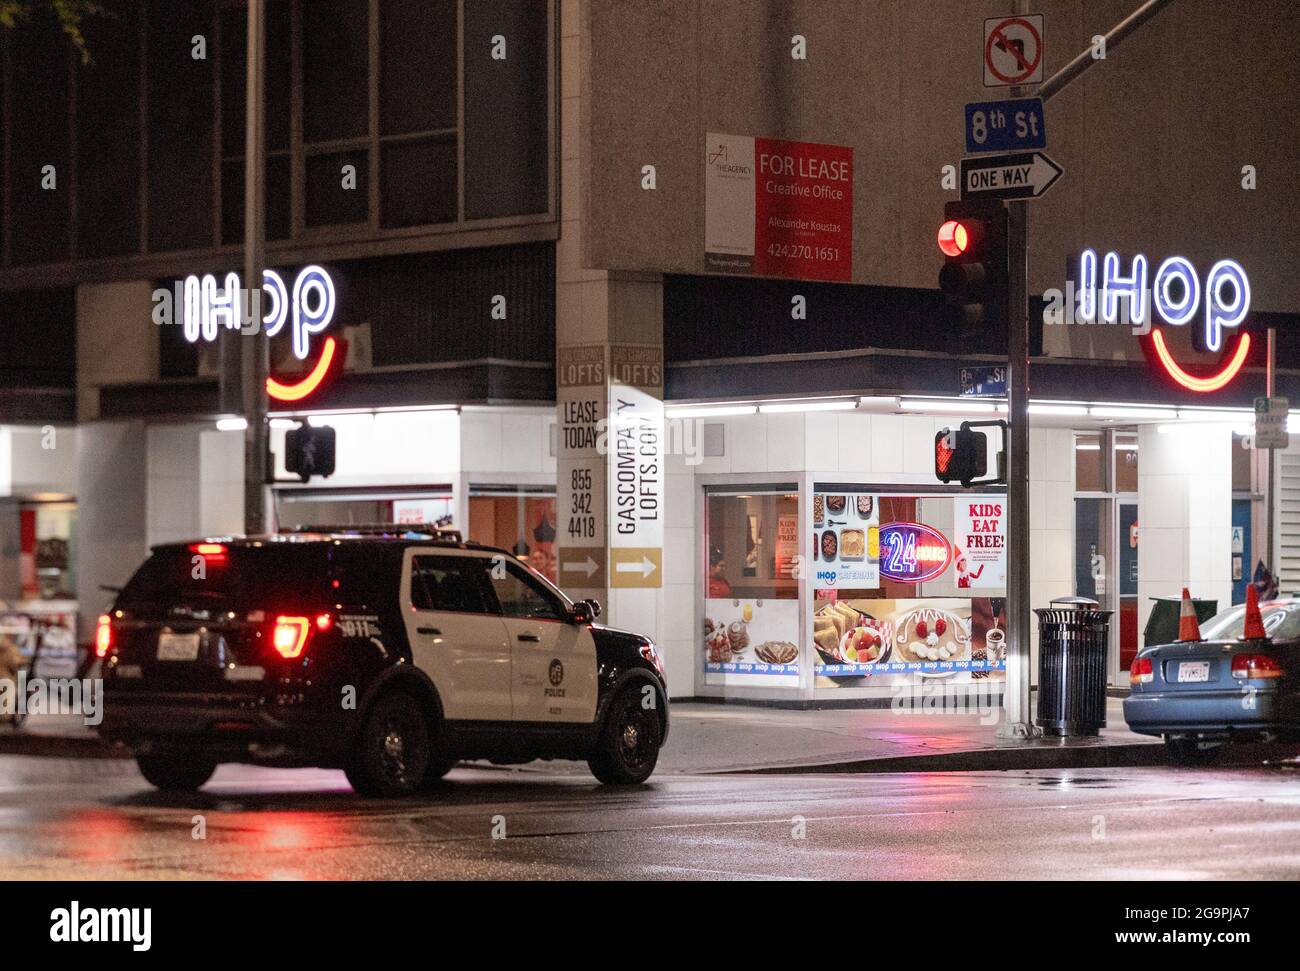 Police car parked near IHOP restaurant, lit up at night, corner of 8th street & Flower str, Downtown Los Angeles, California, United States Stock Photo